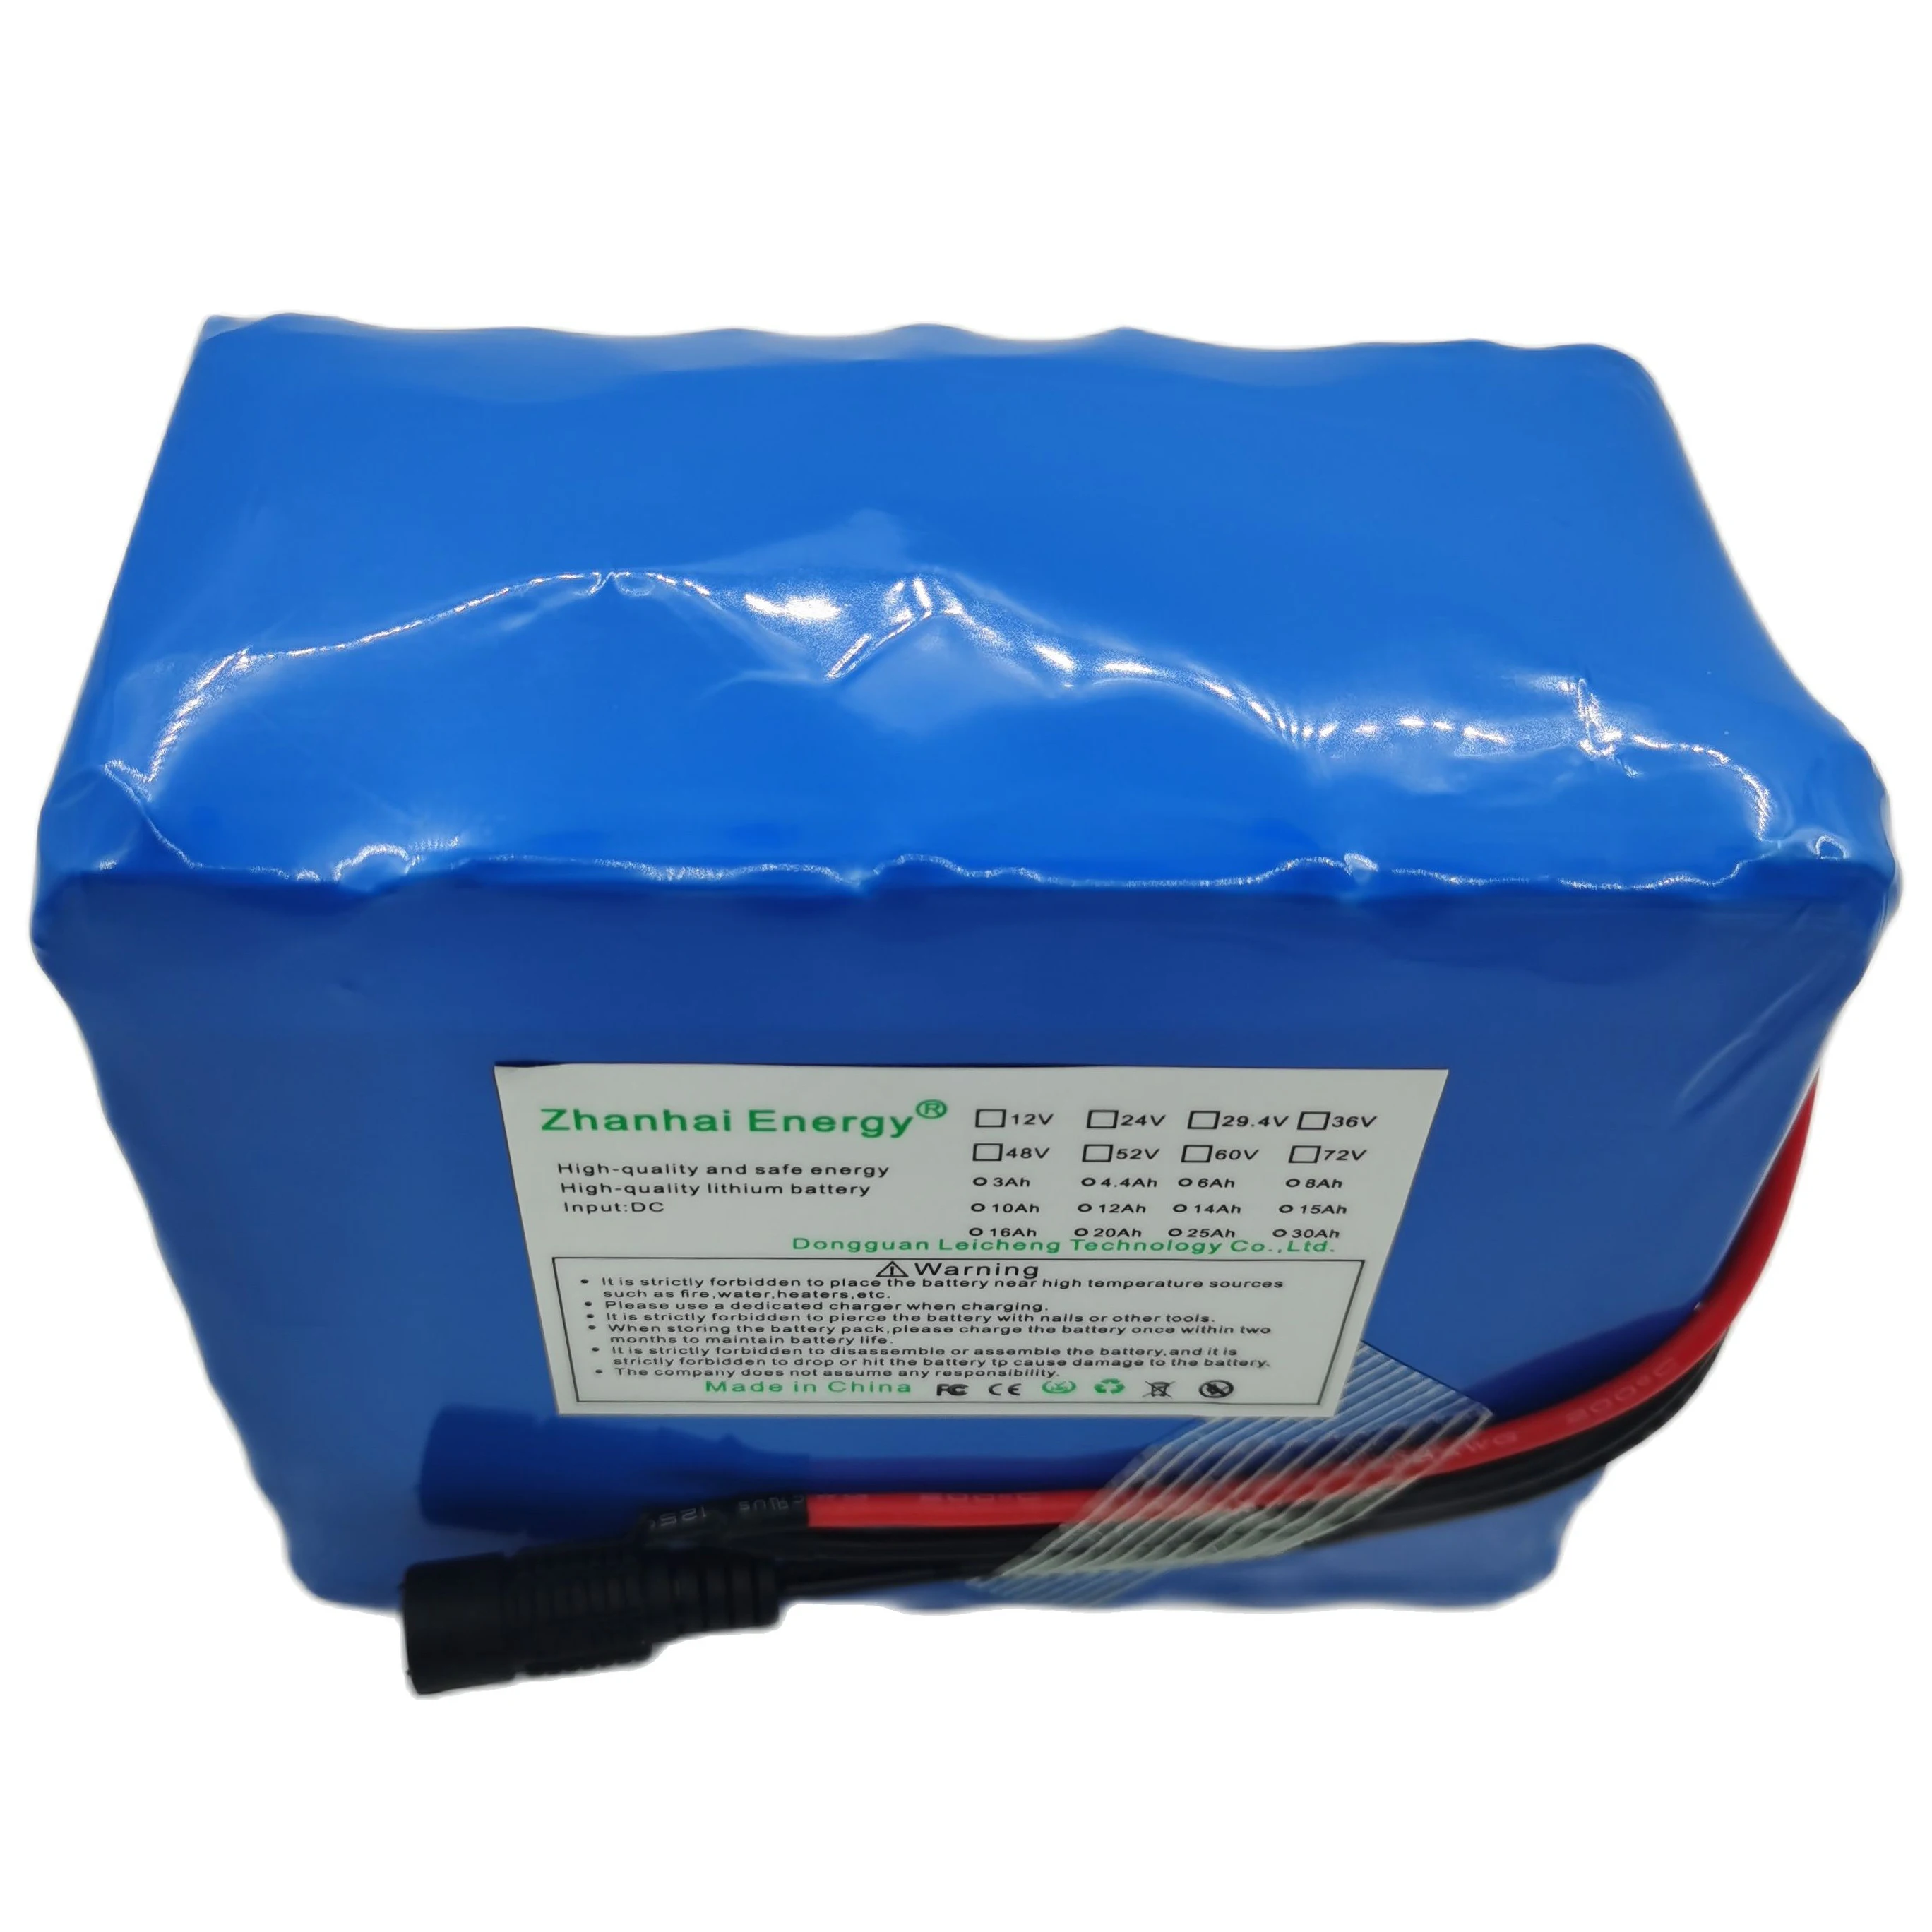 

24V 29.4V 20Ah 16Ah 14Ah 18650 Li-Ion Rechargeable Battery Pack 7S 6P For Below 750W Electric Bicycles New Customizable Charger